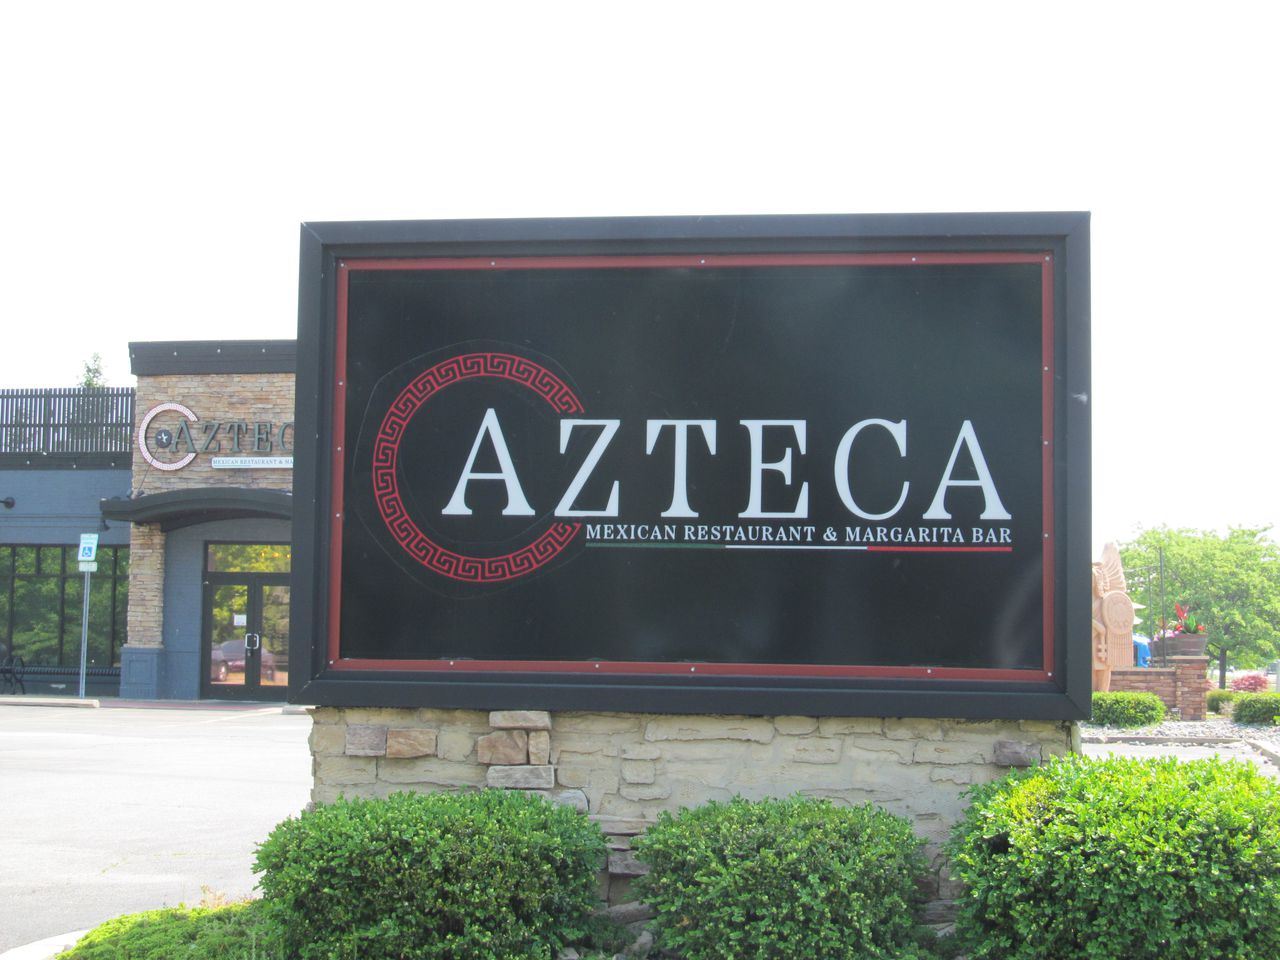 Azteca has one of the highest health inspector violation counts in Lake County.